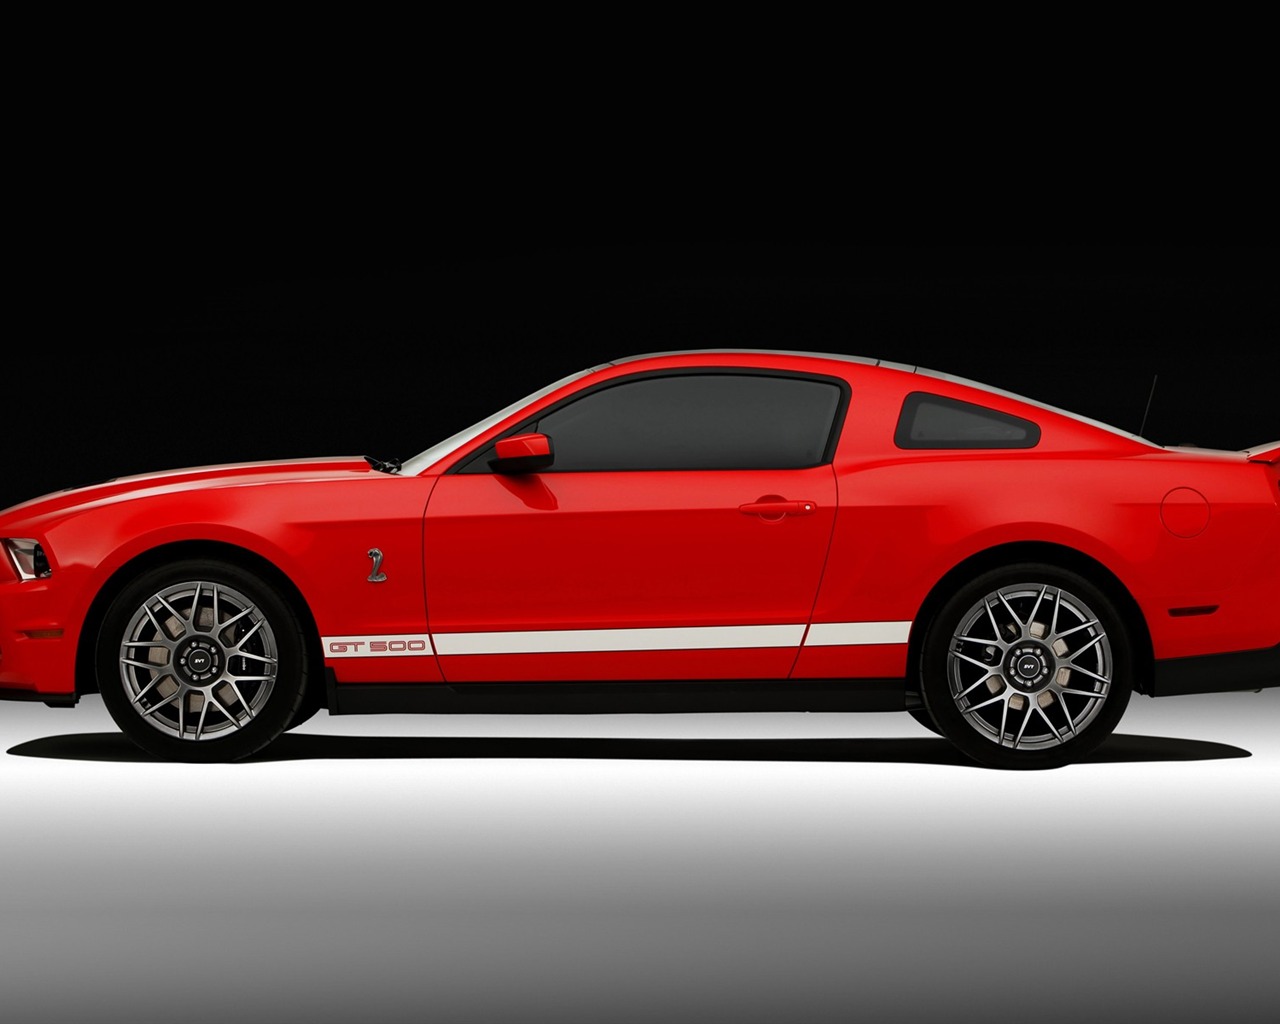 Ford Mustang GT500 Wallpapers #6 - 1280x1024